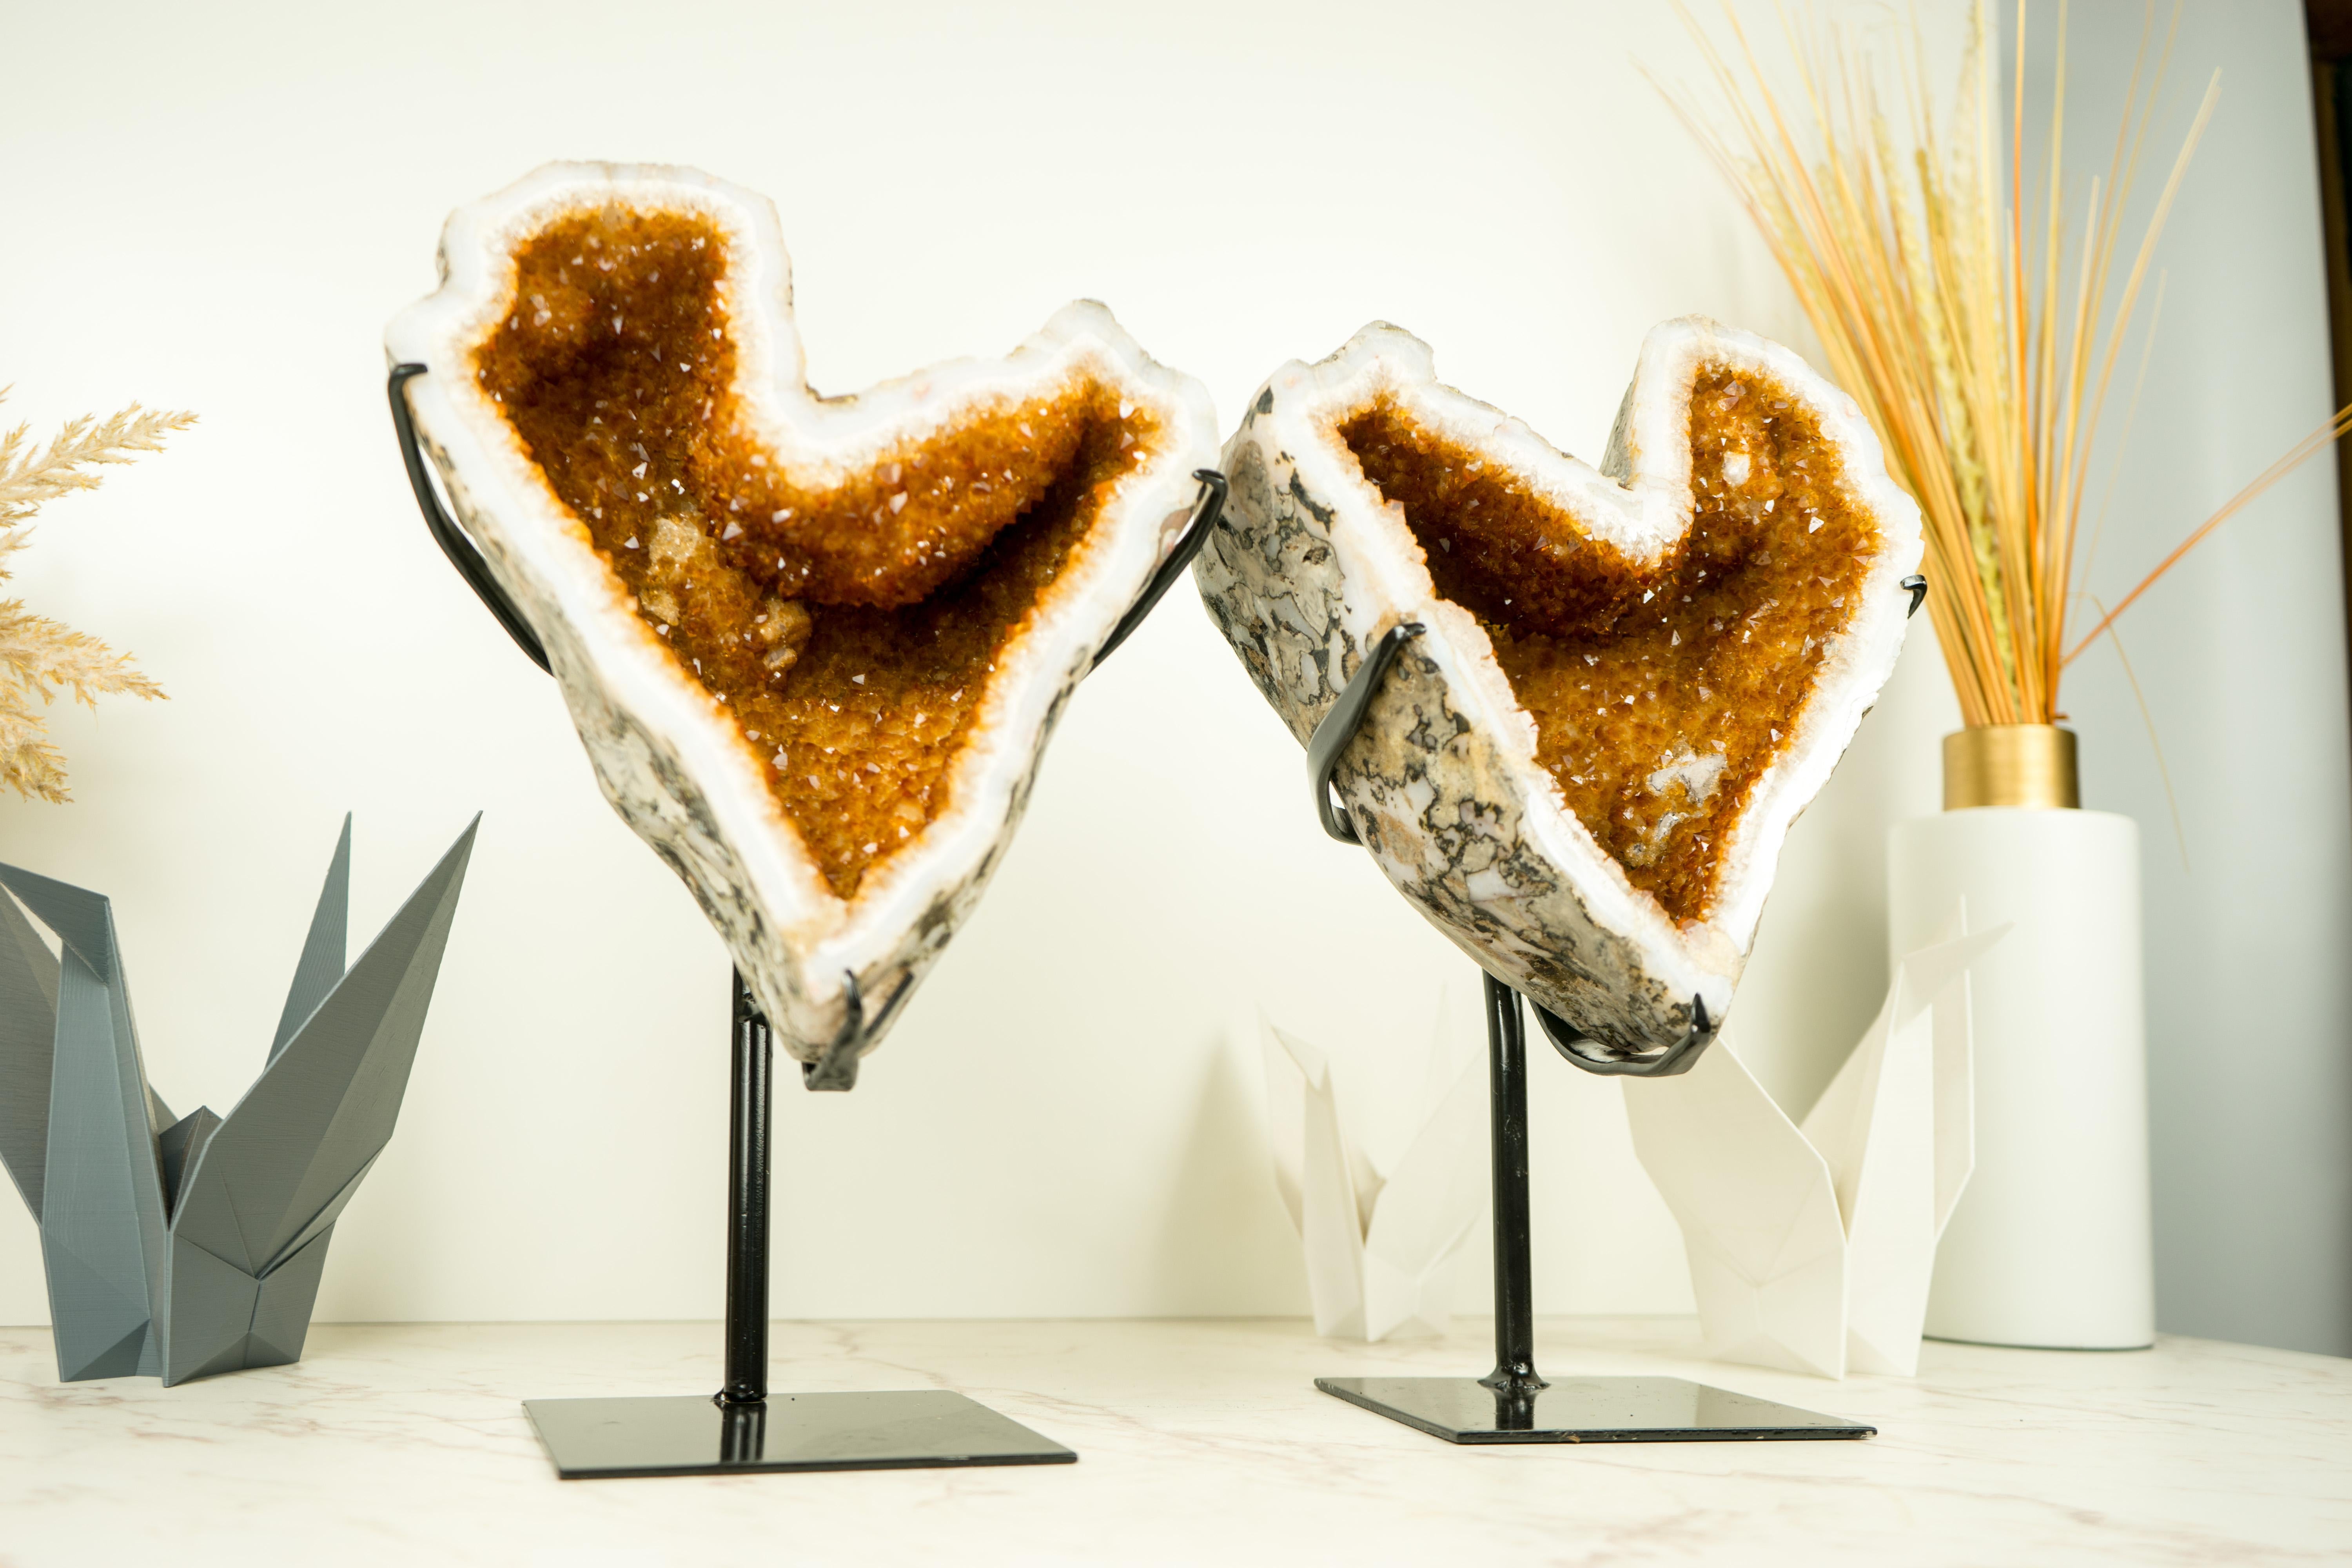 Naturally Shaped Citrine Heart Geodes with High-Grade Citrine Druzy on White Agate Matrix

▫️ Description

Bringing the rarest geode form, this gallery-grade geode is naturally formed in a heart shape and is characterized by its warm orange hue that